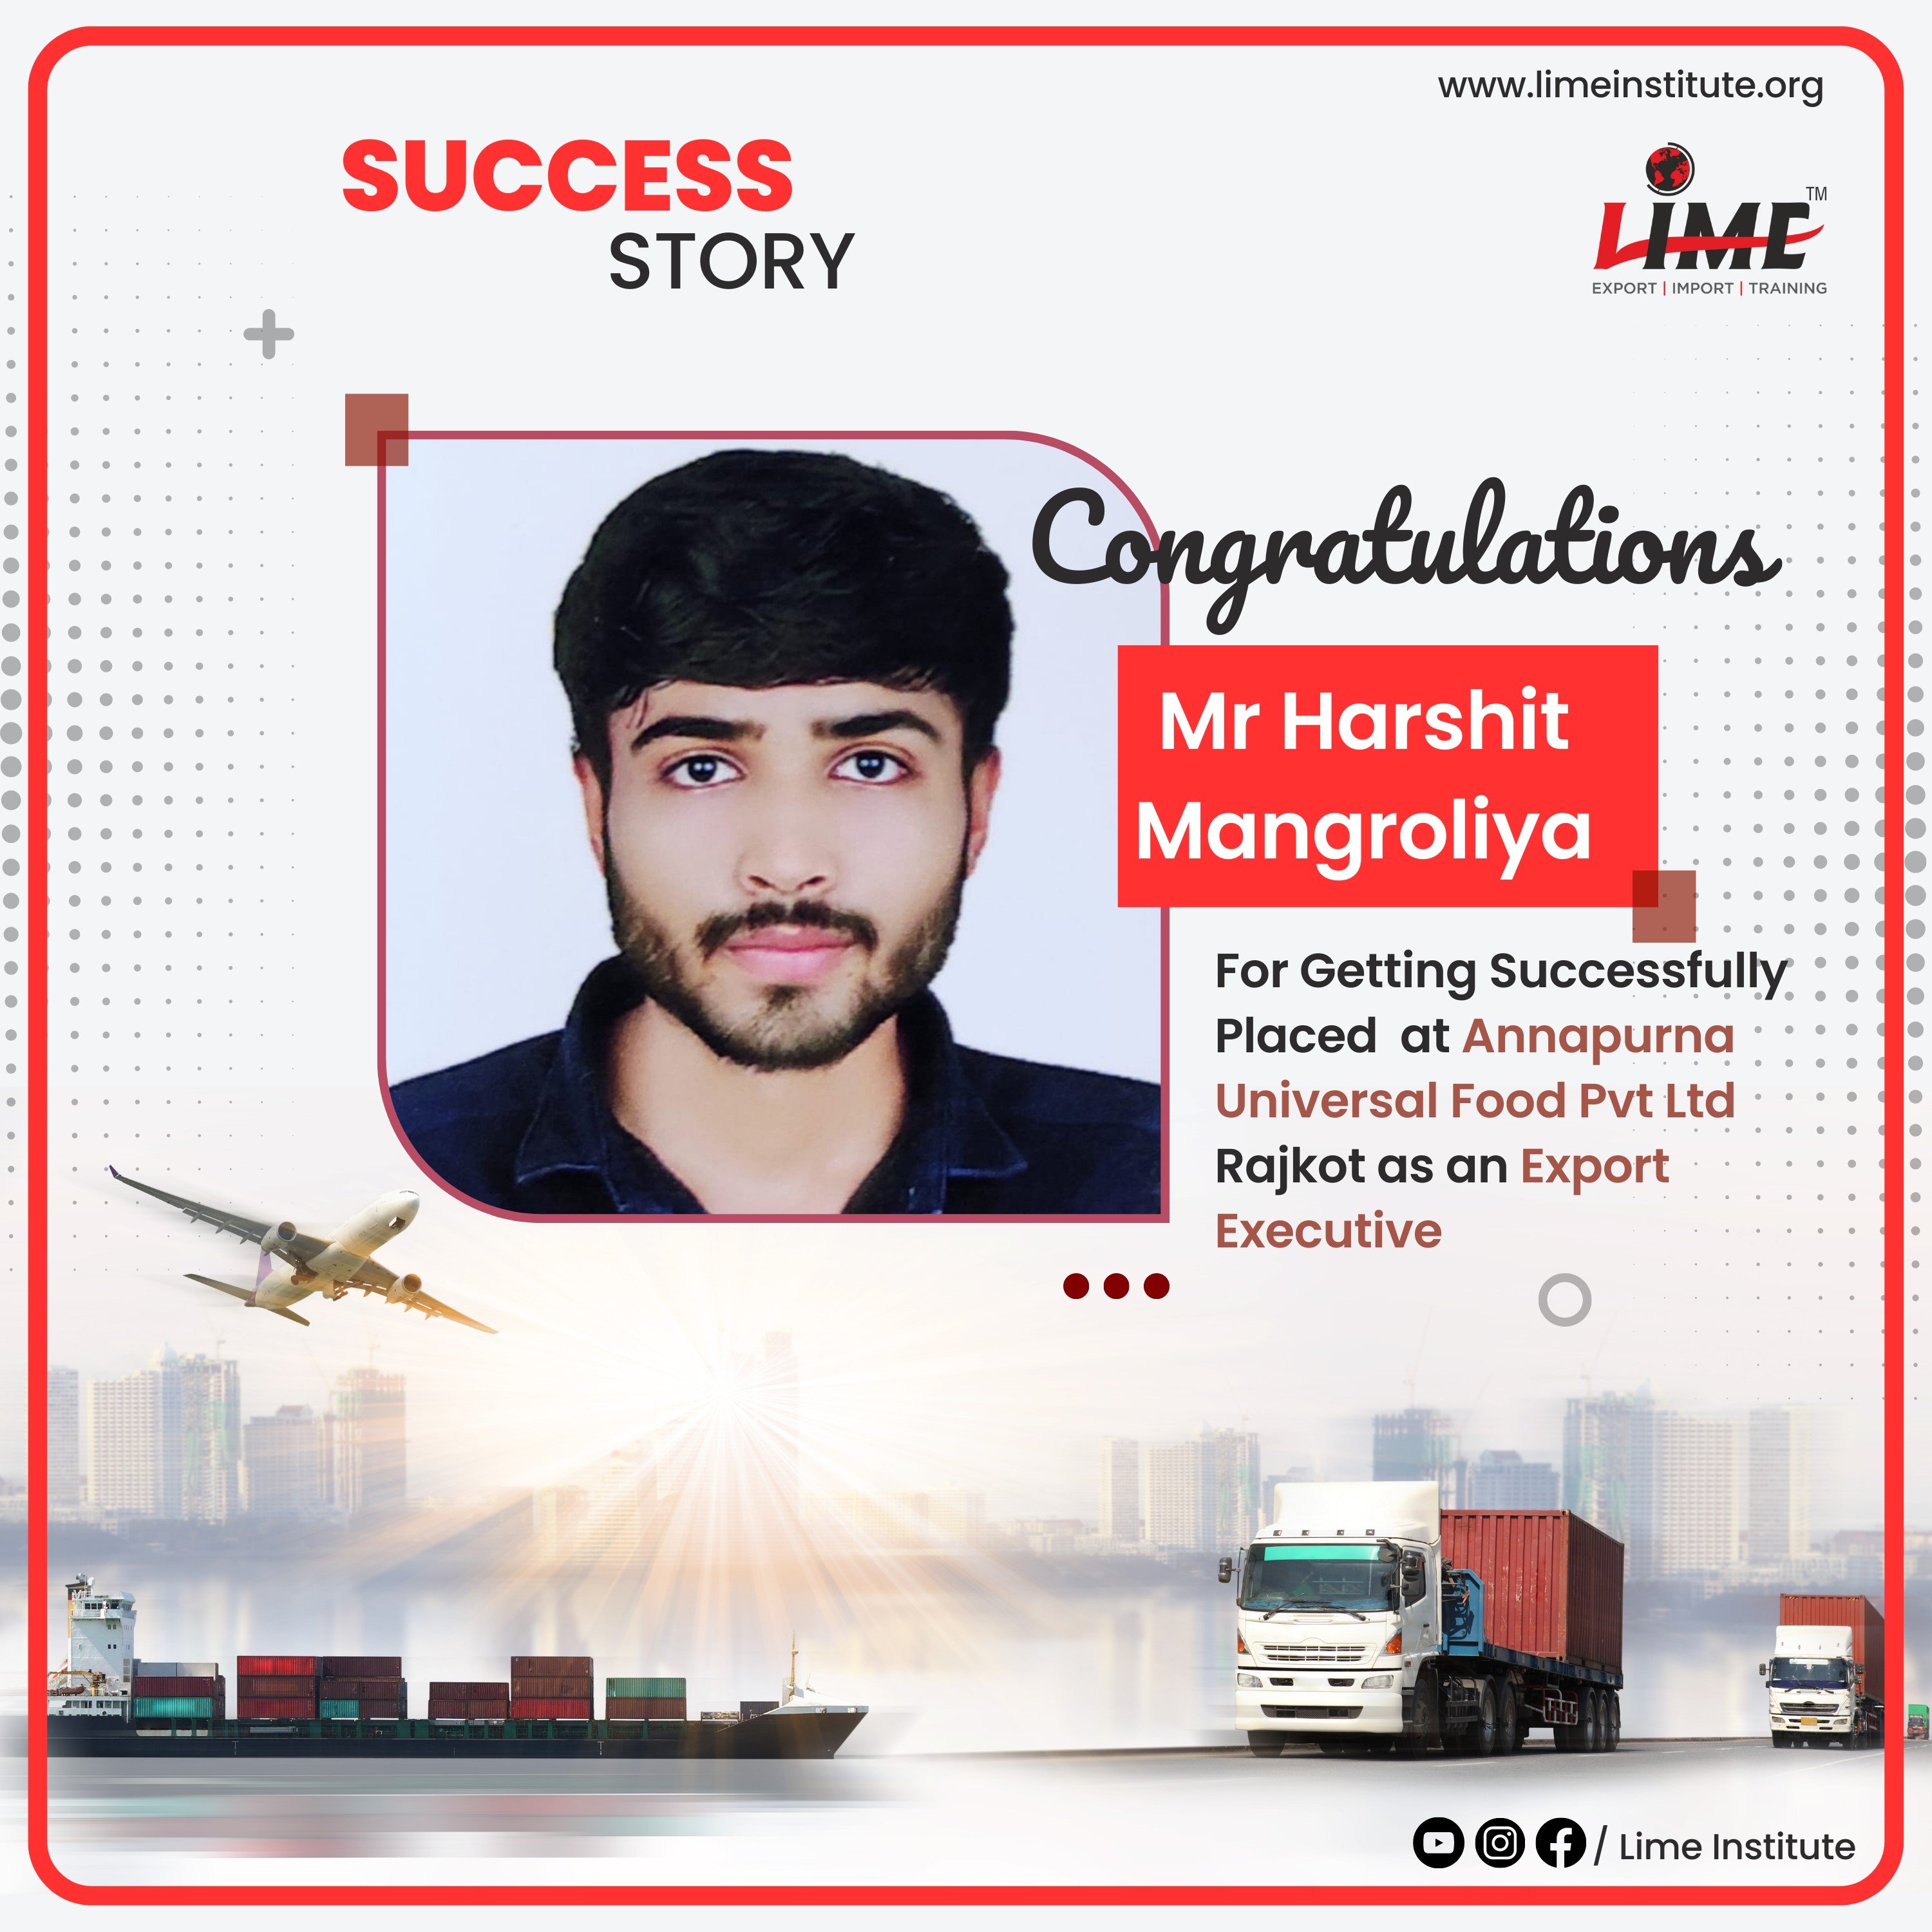 Congratulations Harshit, we at lime institute are feeling proud on your achievement